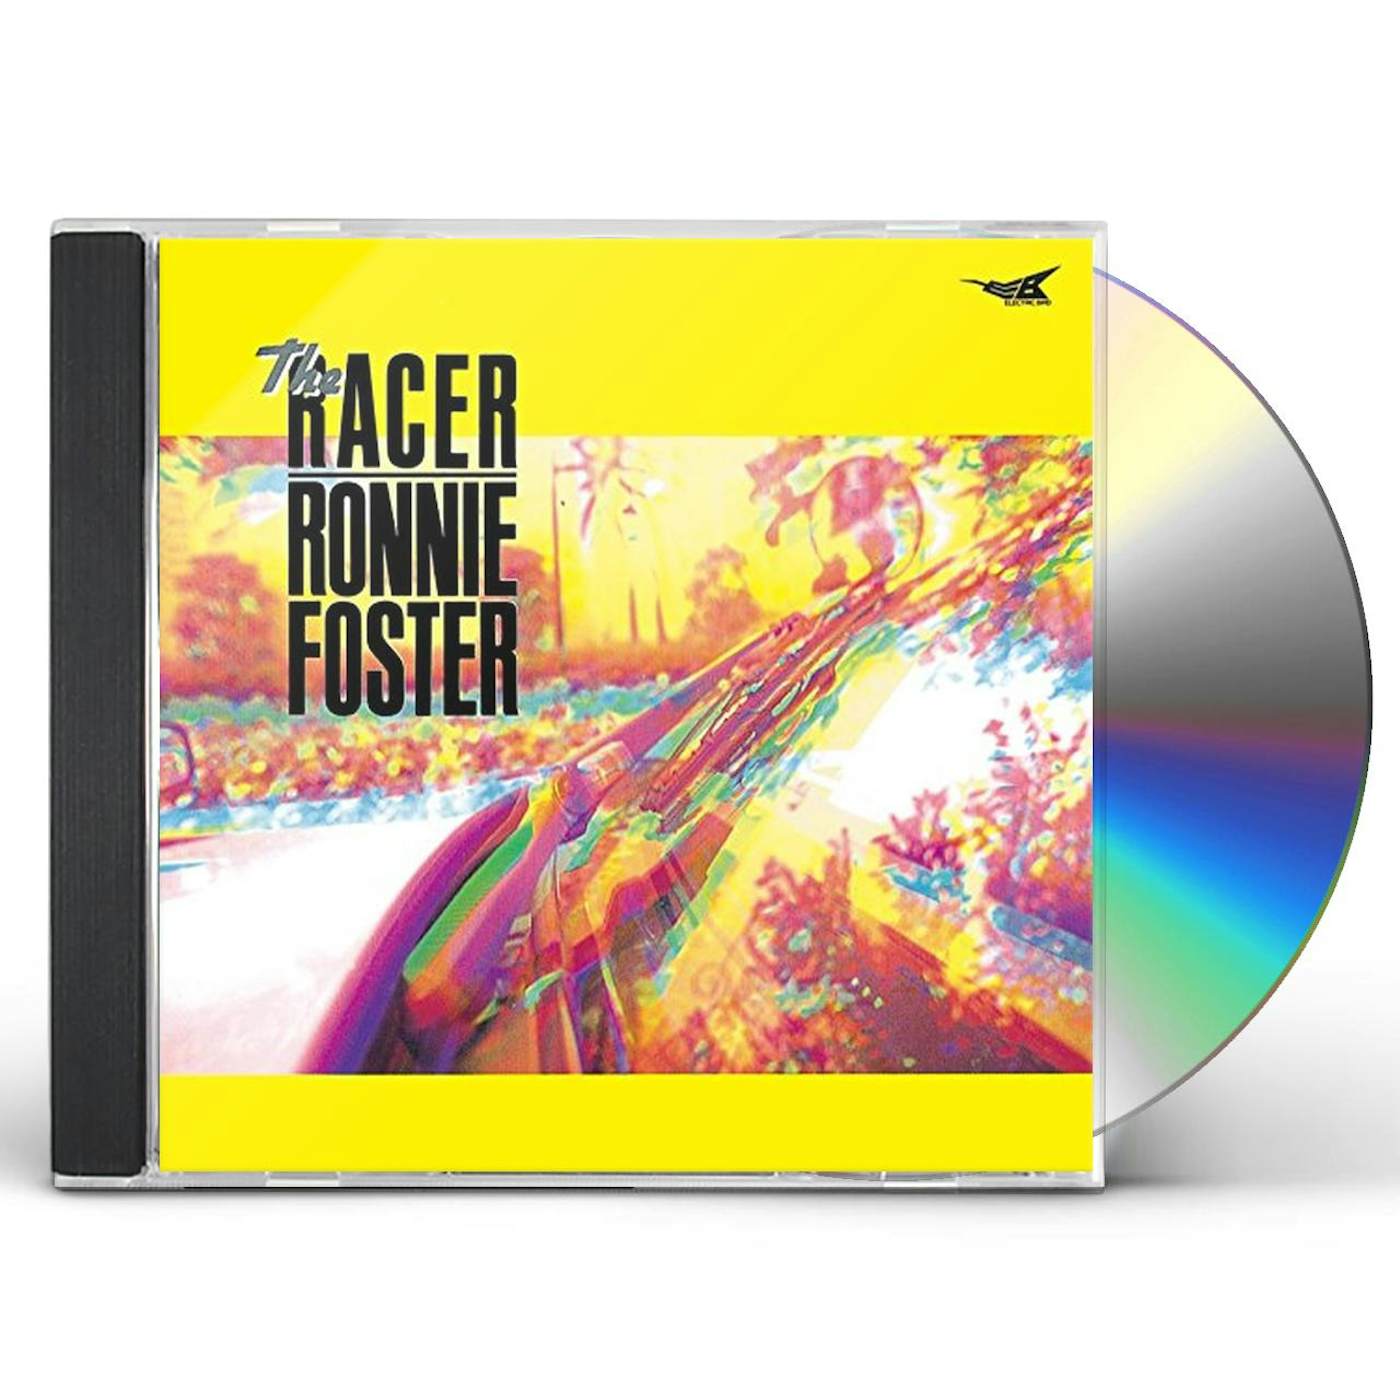 Ronnie Foster RACER CD